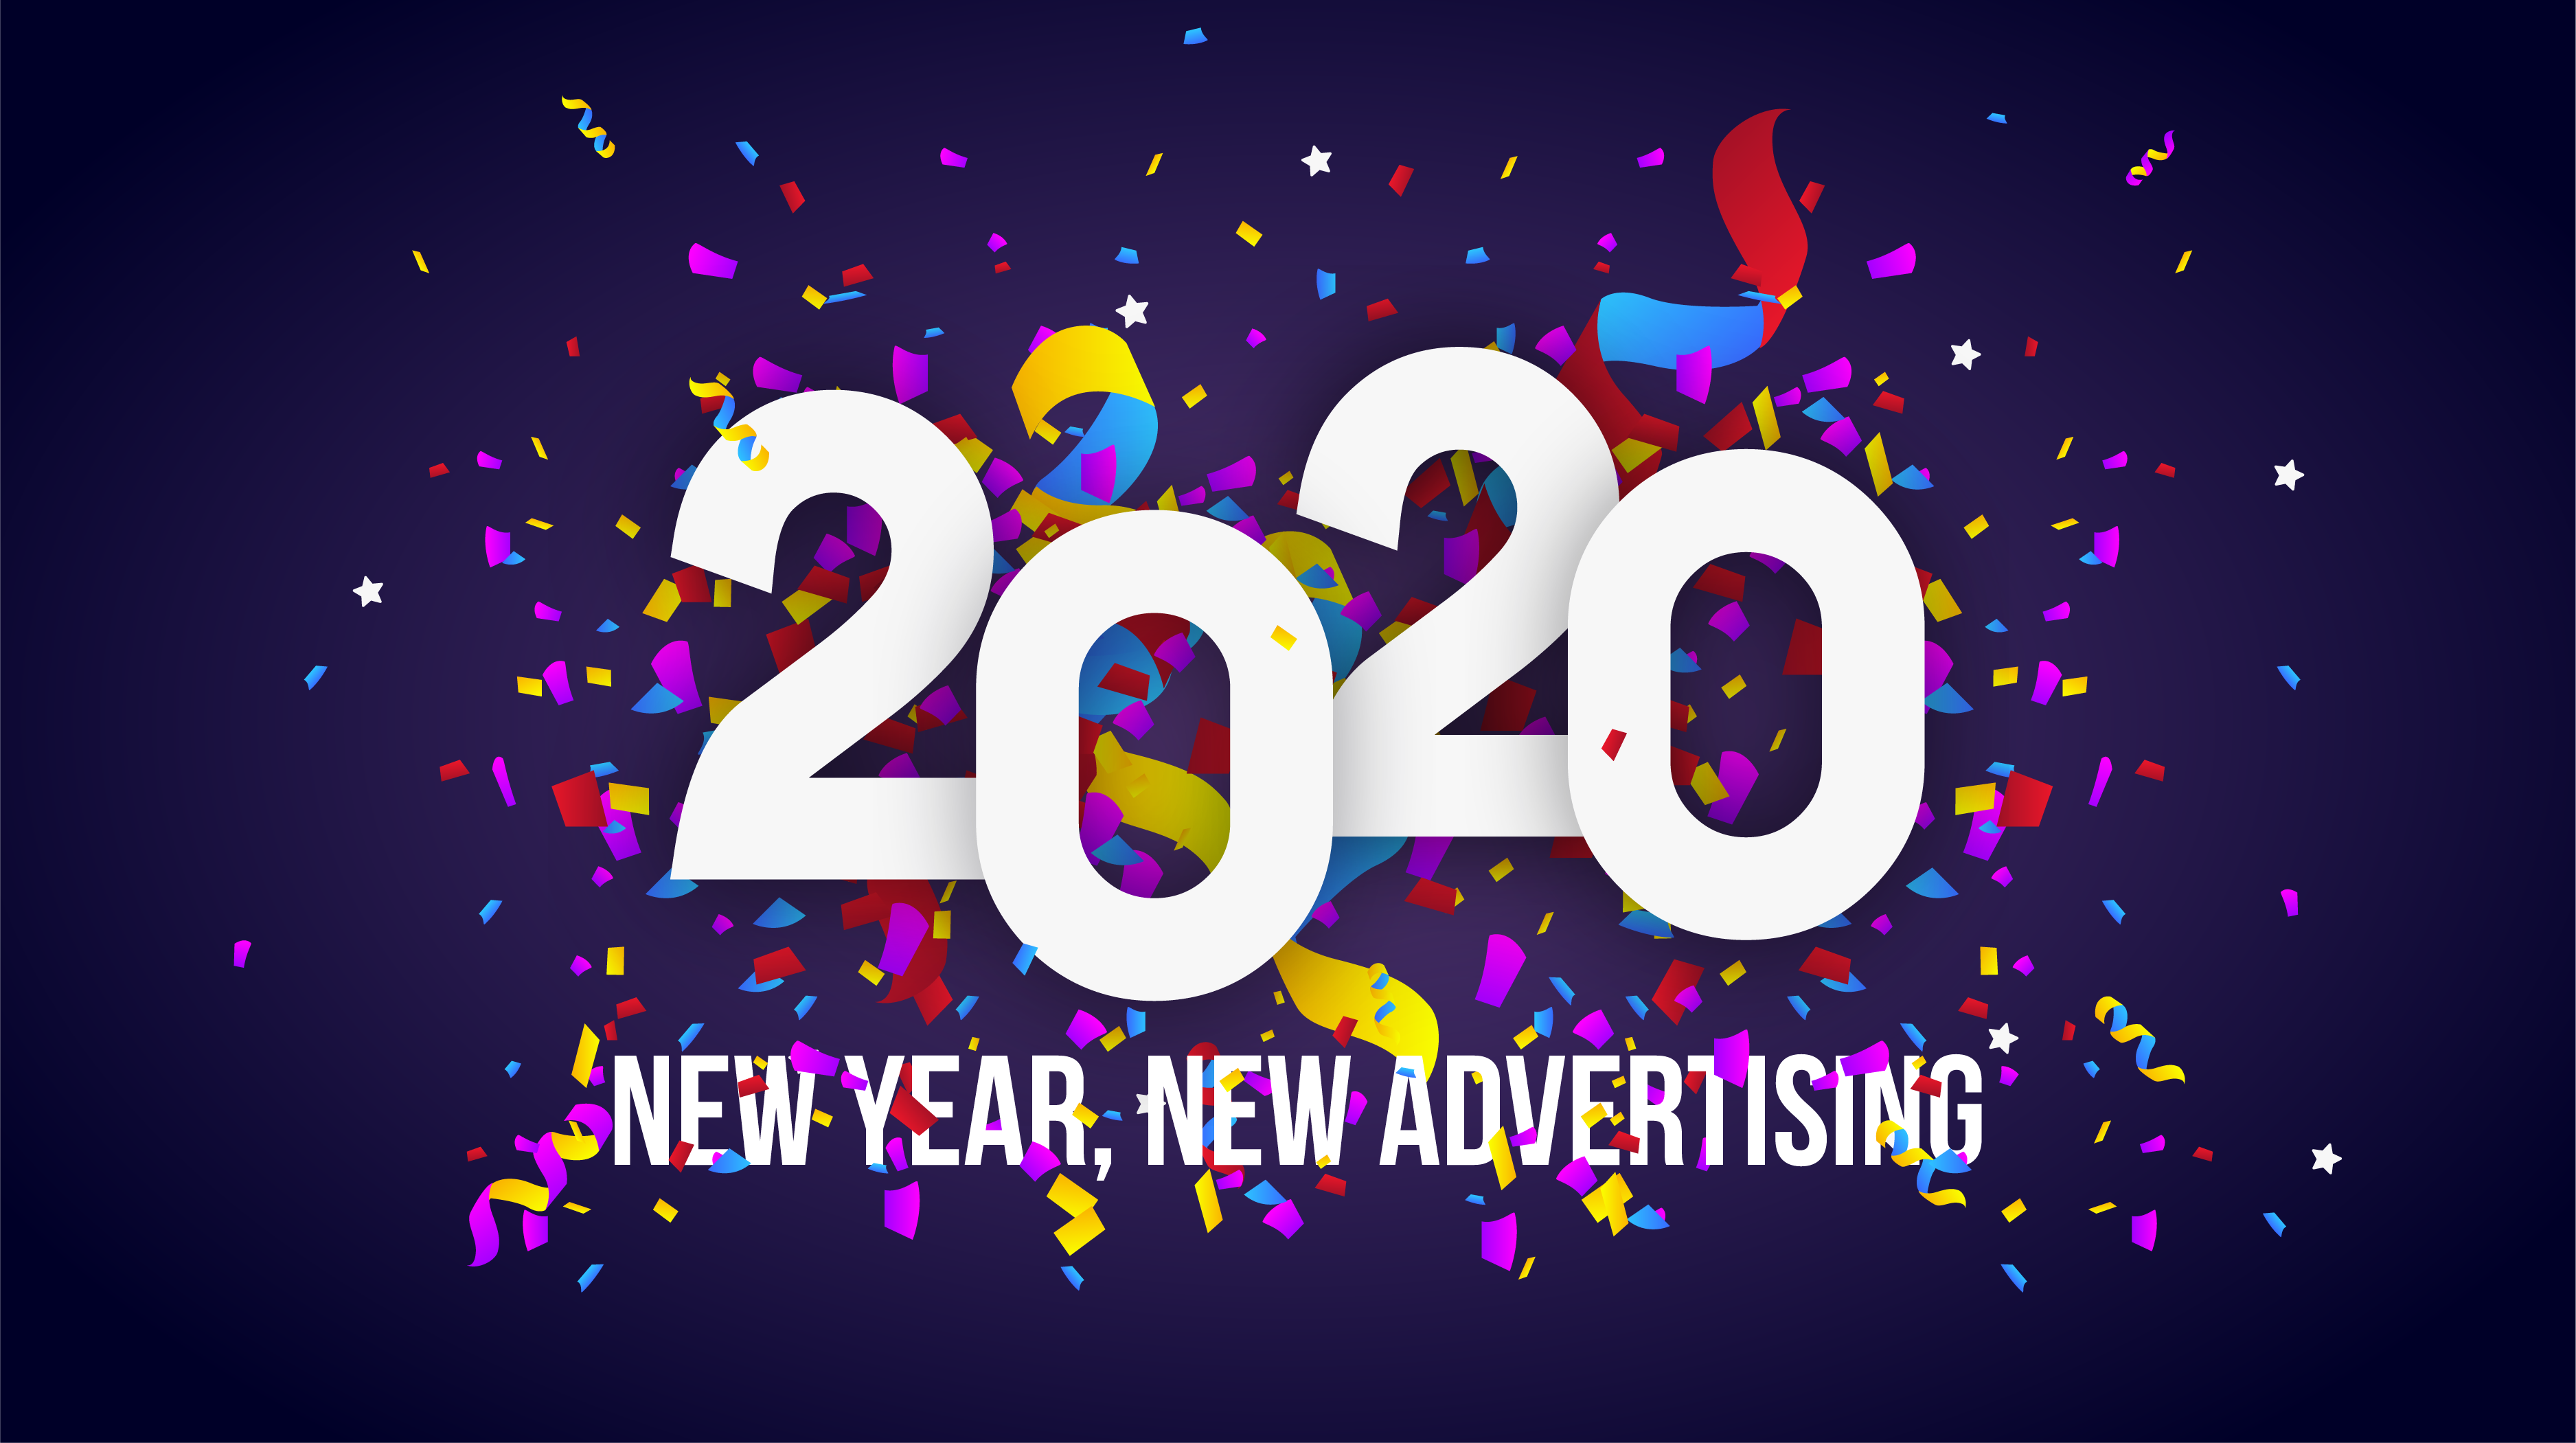 2020: New Year, New Advertising. 